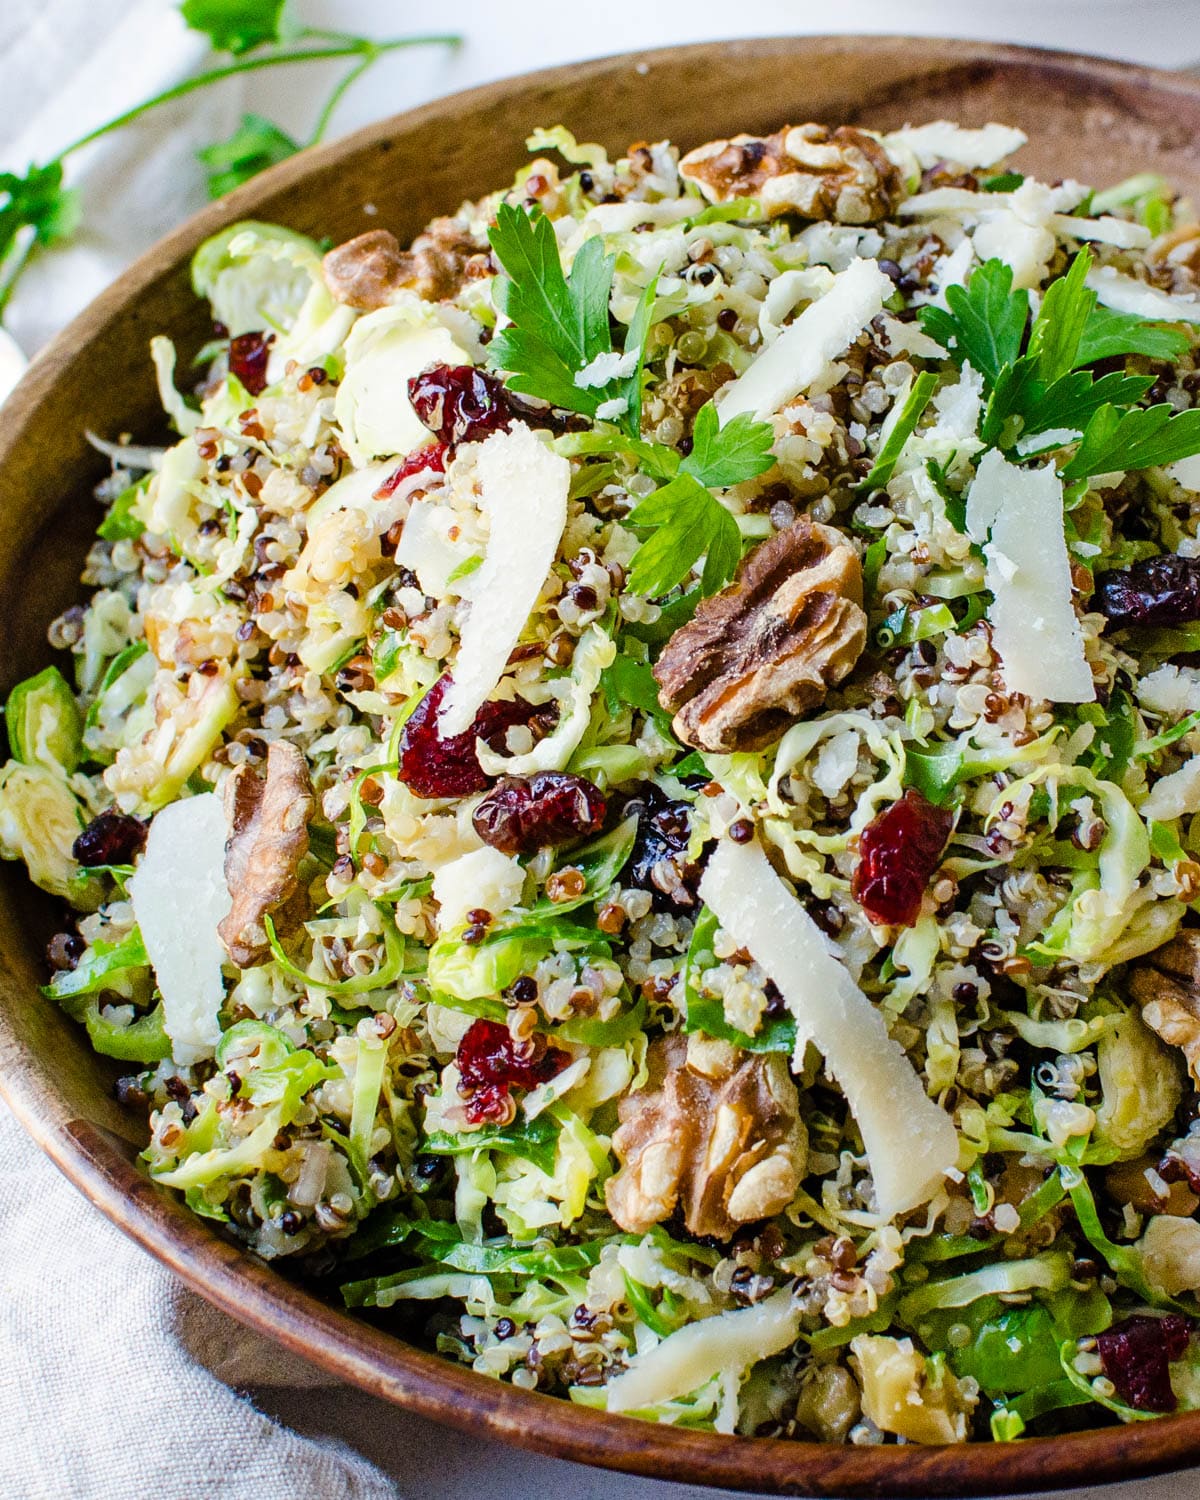 The quinoa brussels sprouts salad in a wooden serving bowl.